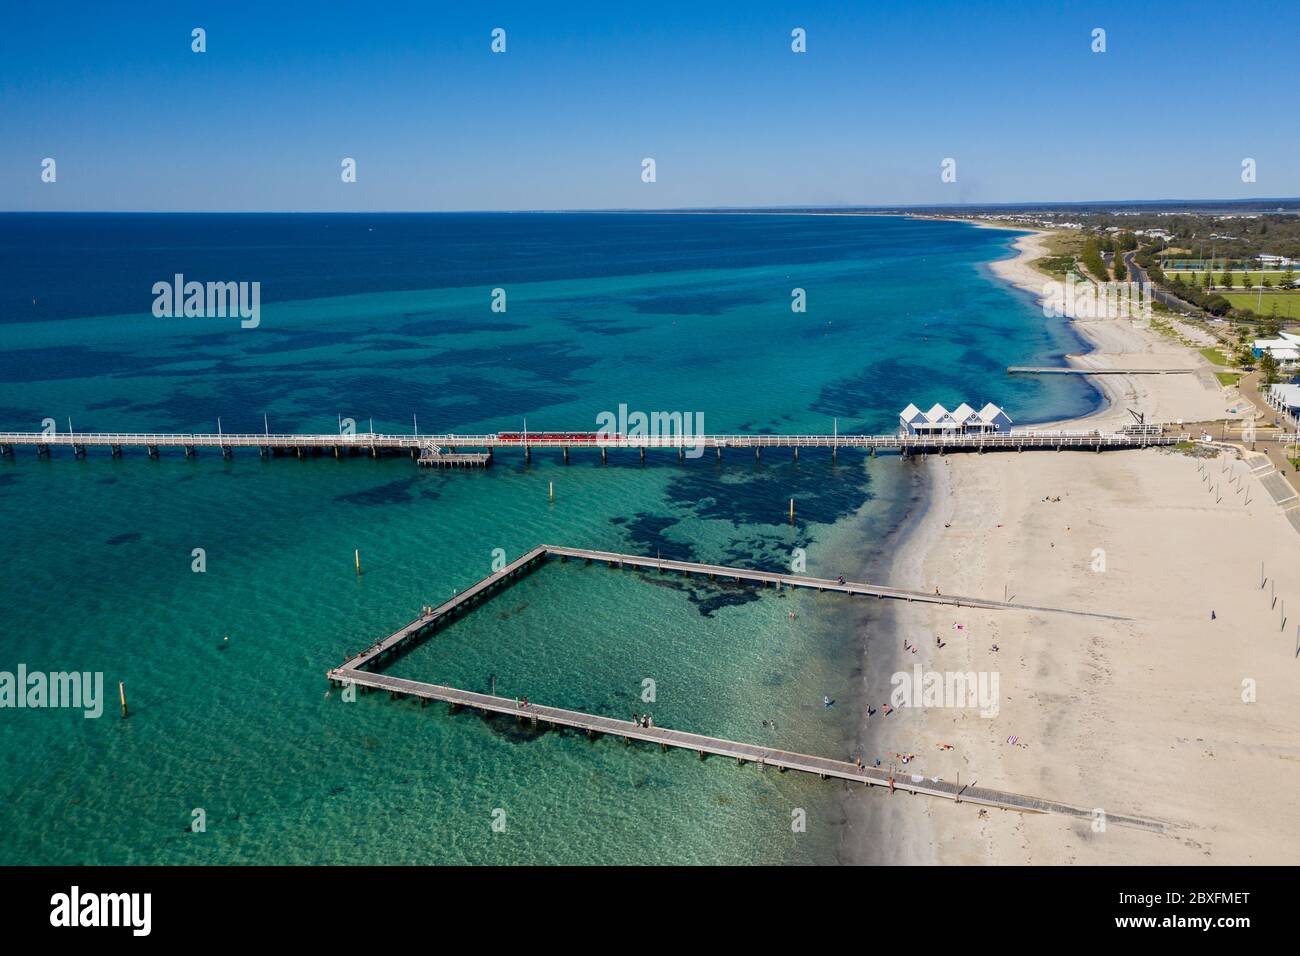 Aerial view of the train on Busselton pier, the worlds longest wooden structure; Busselton is 220km south west of Perth in Western Australia Stock Photo